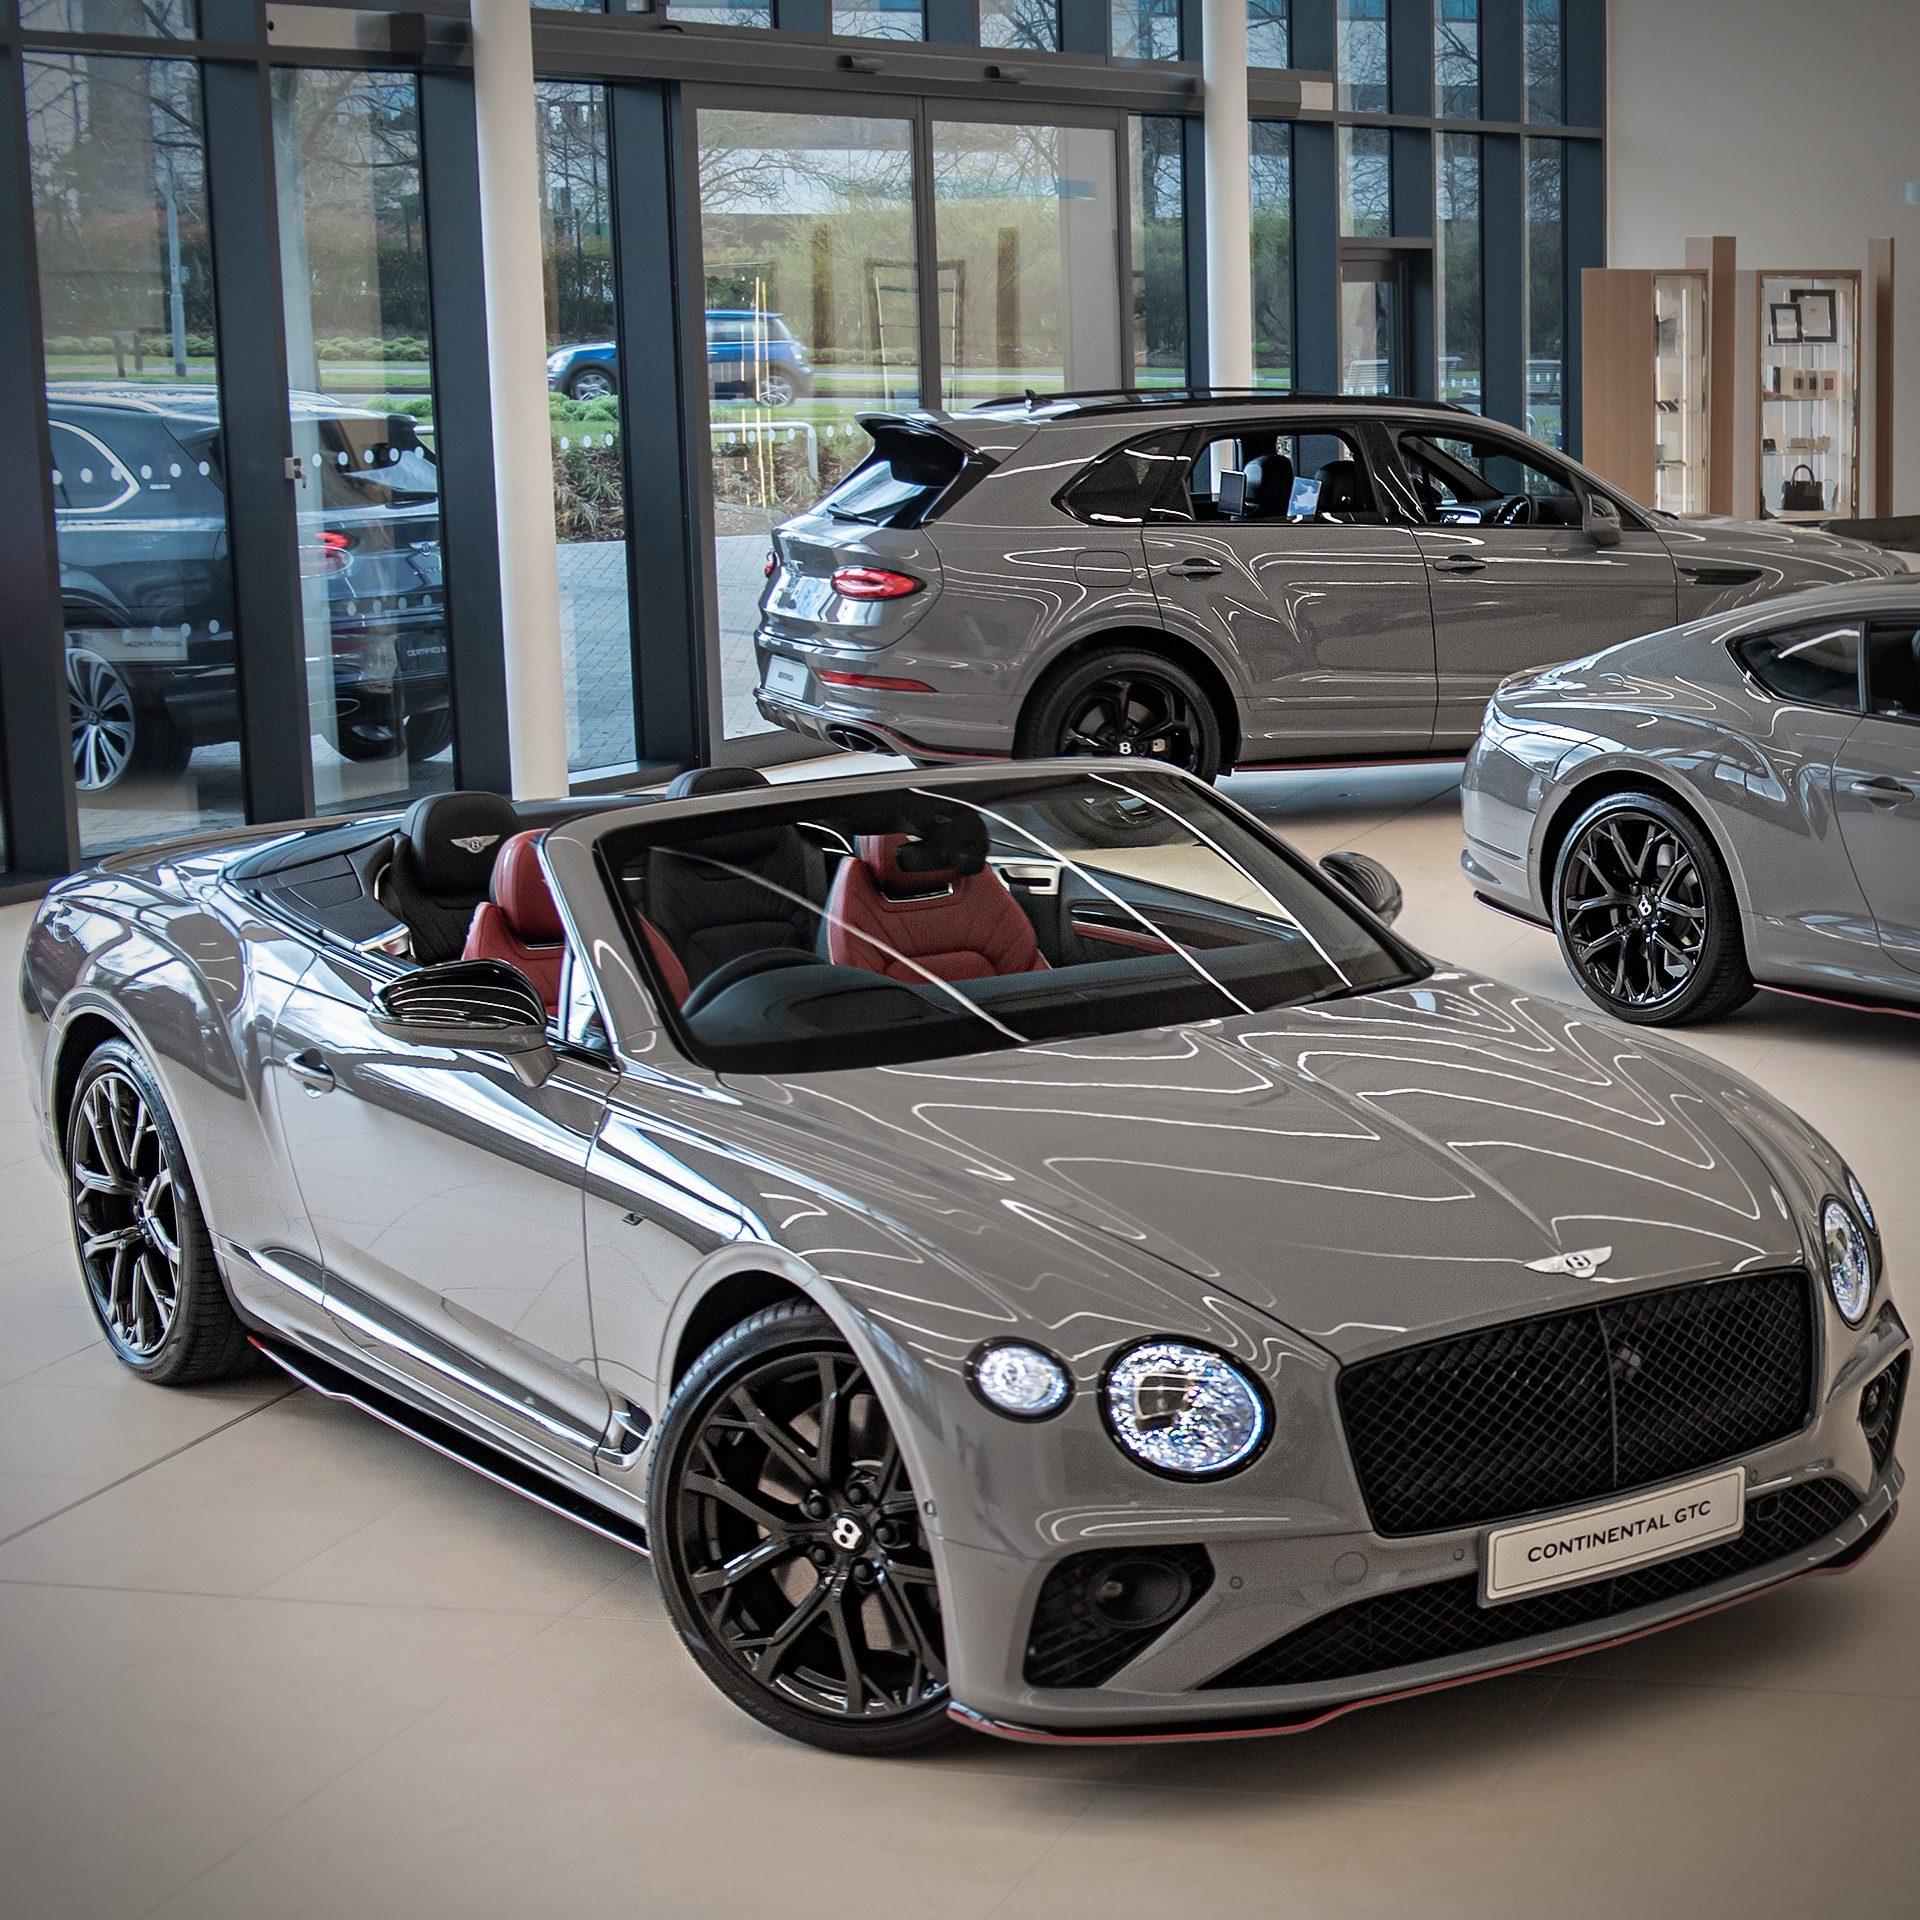 H.R. Owen - the UK’s leading luxury automotive dealer group – has officially opened the doors to its brand-new Bentley Hatfield showroom via 360 Magazine.